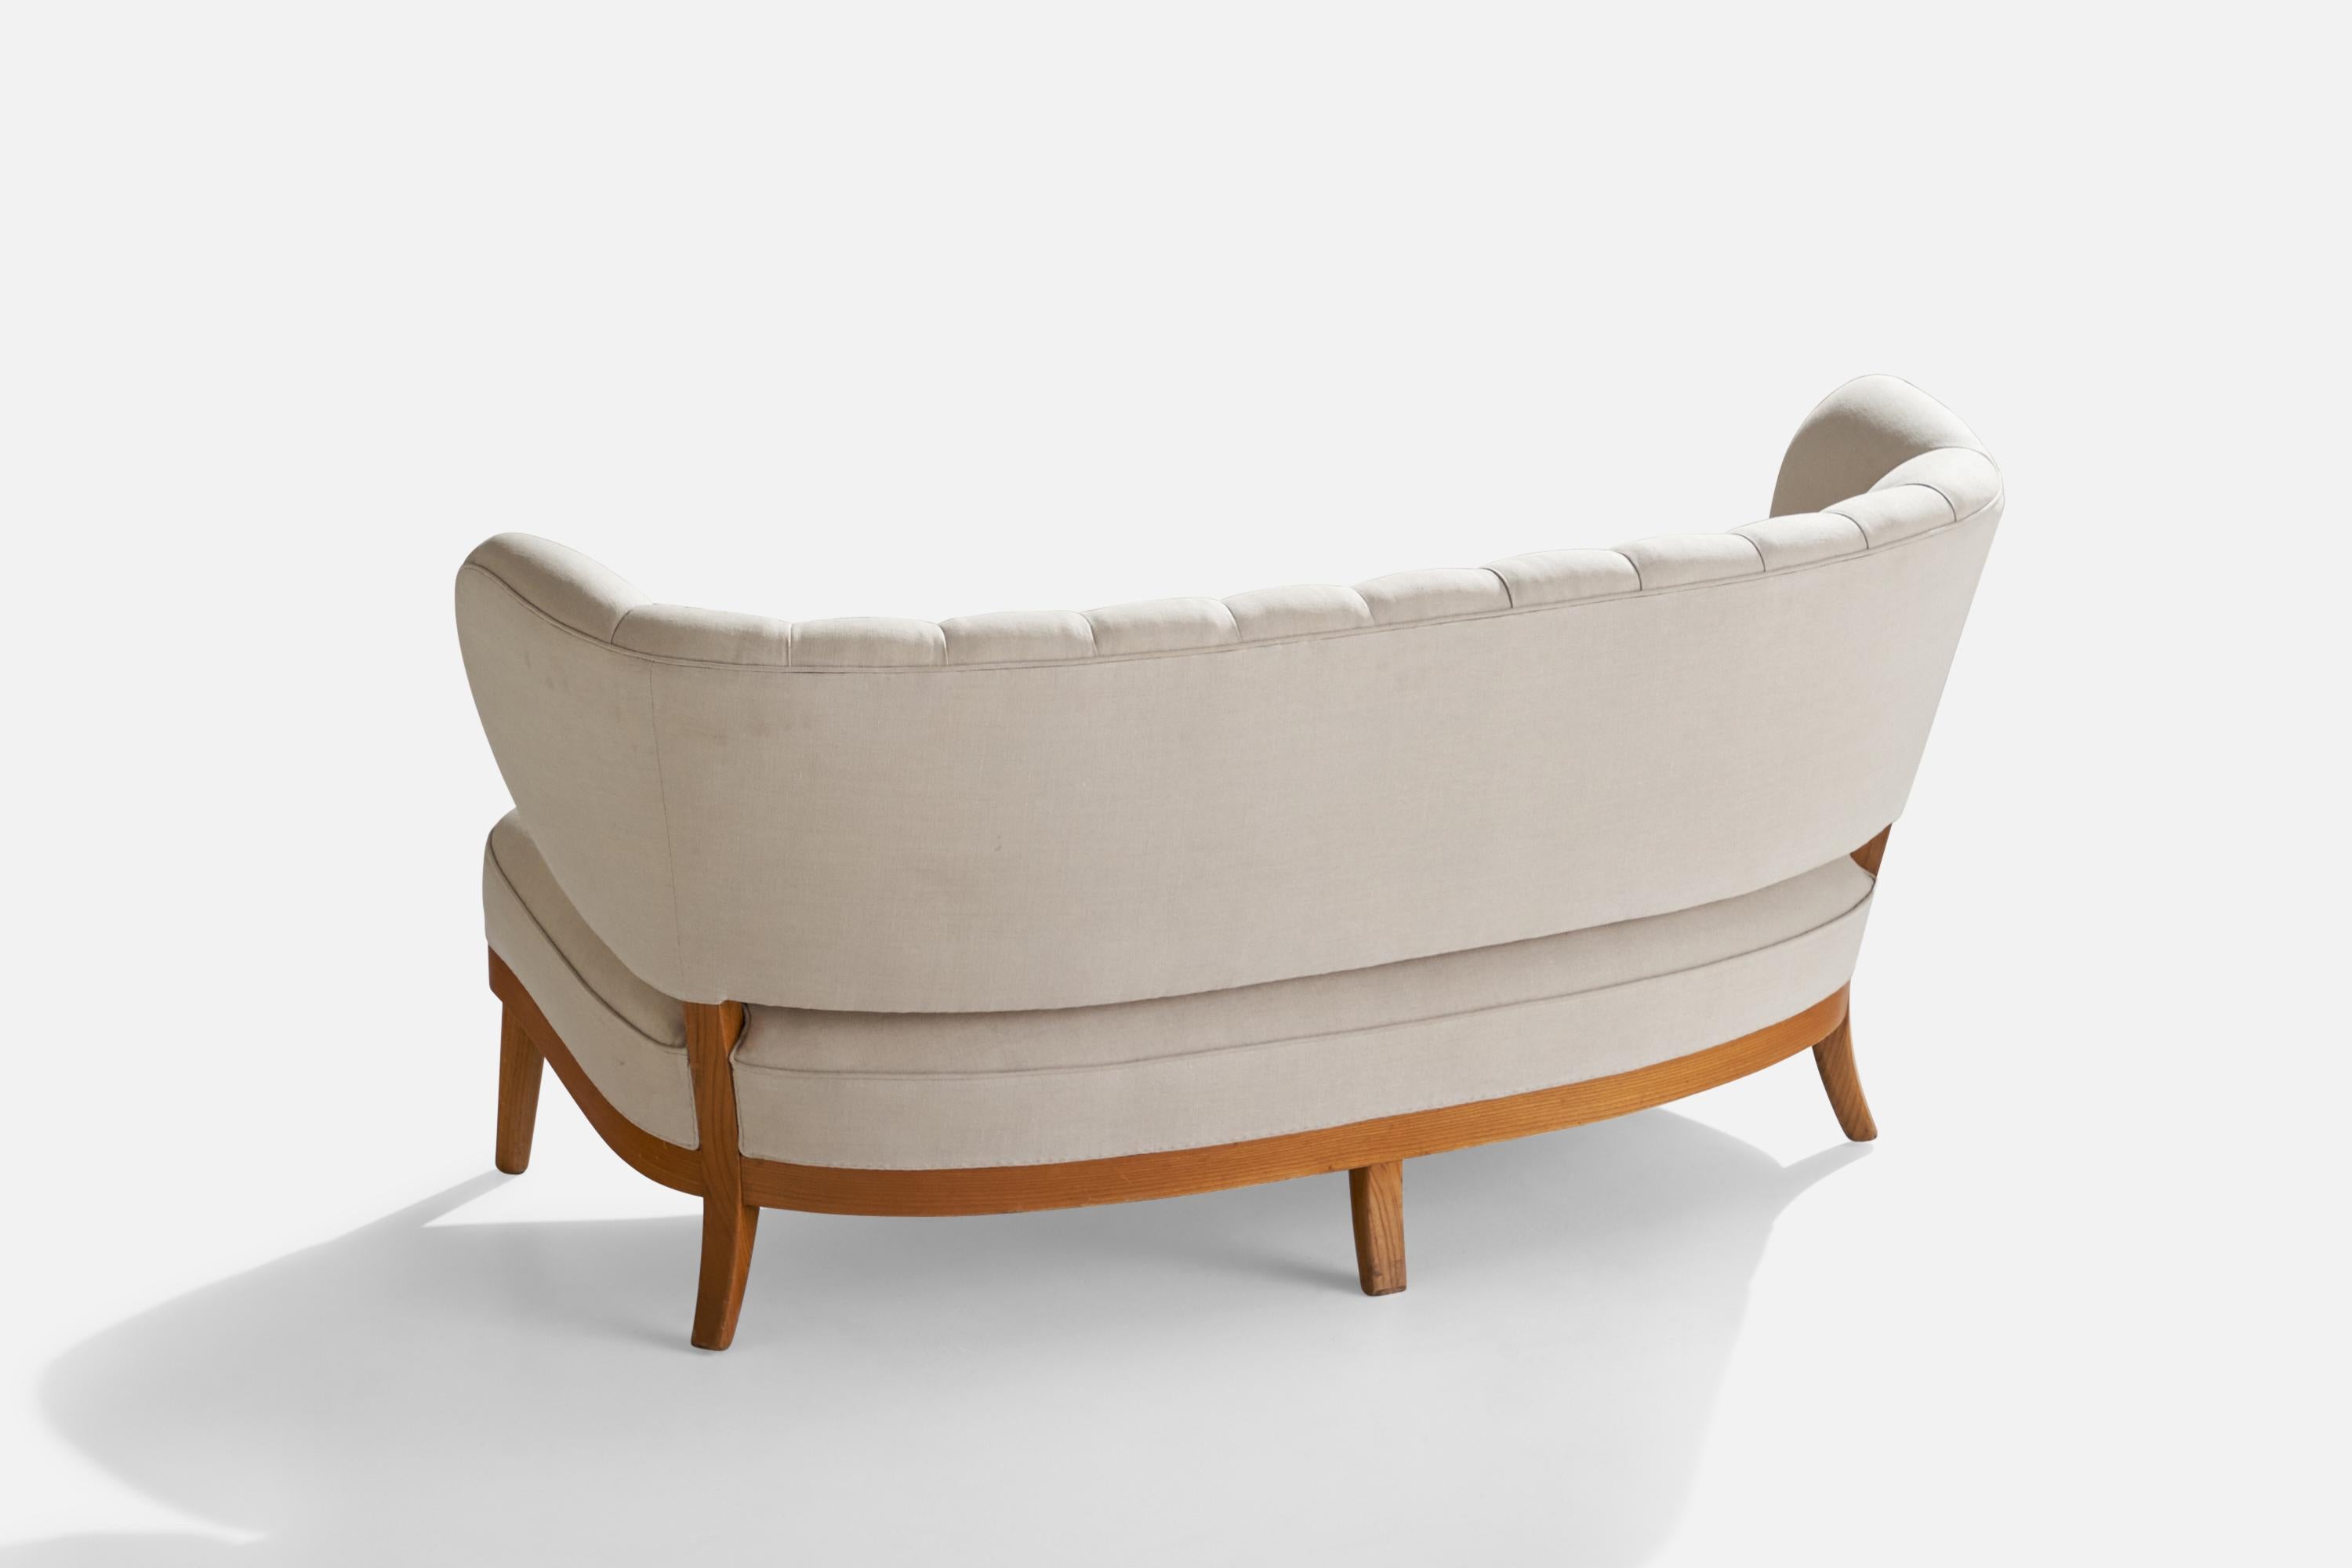 An off-white fabric and elm settee designed by Otto Schultz and produced by Boet, Sweden, c. 1940s.

Seat height 16”.